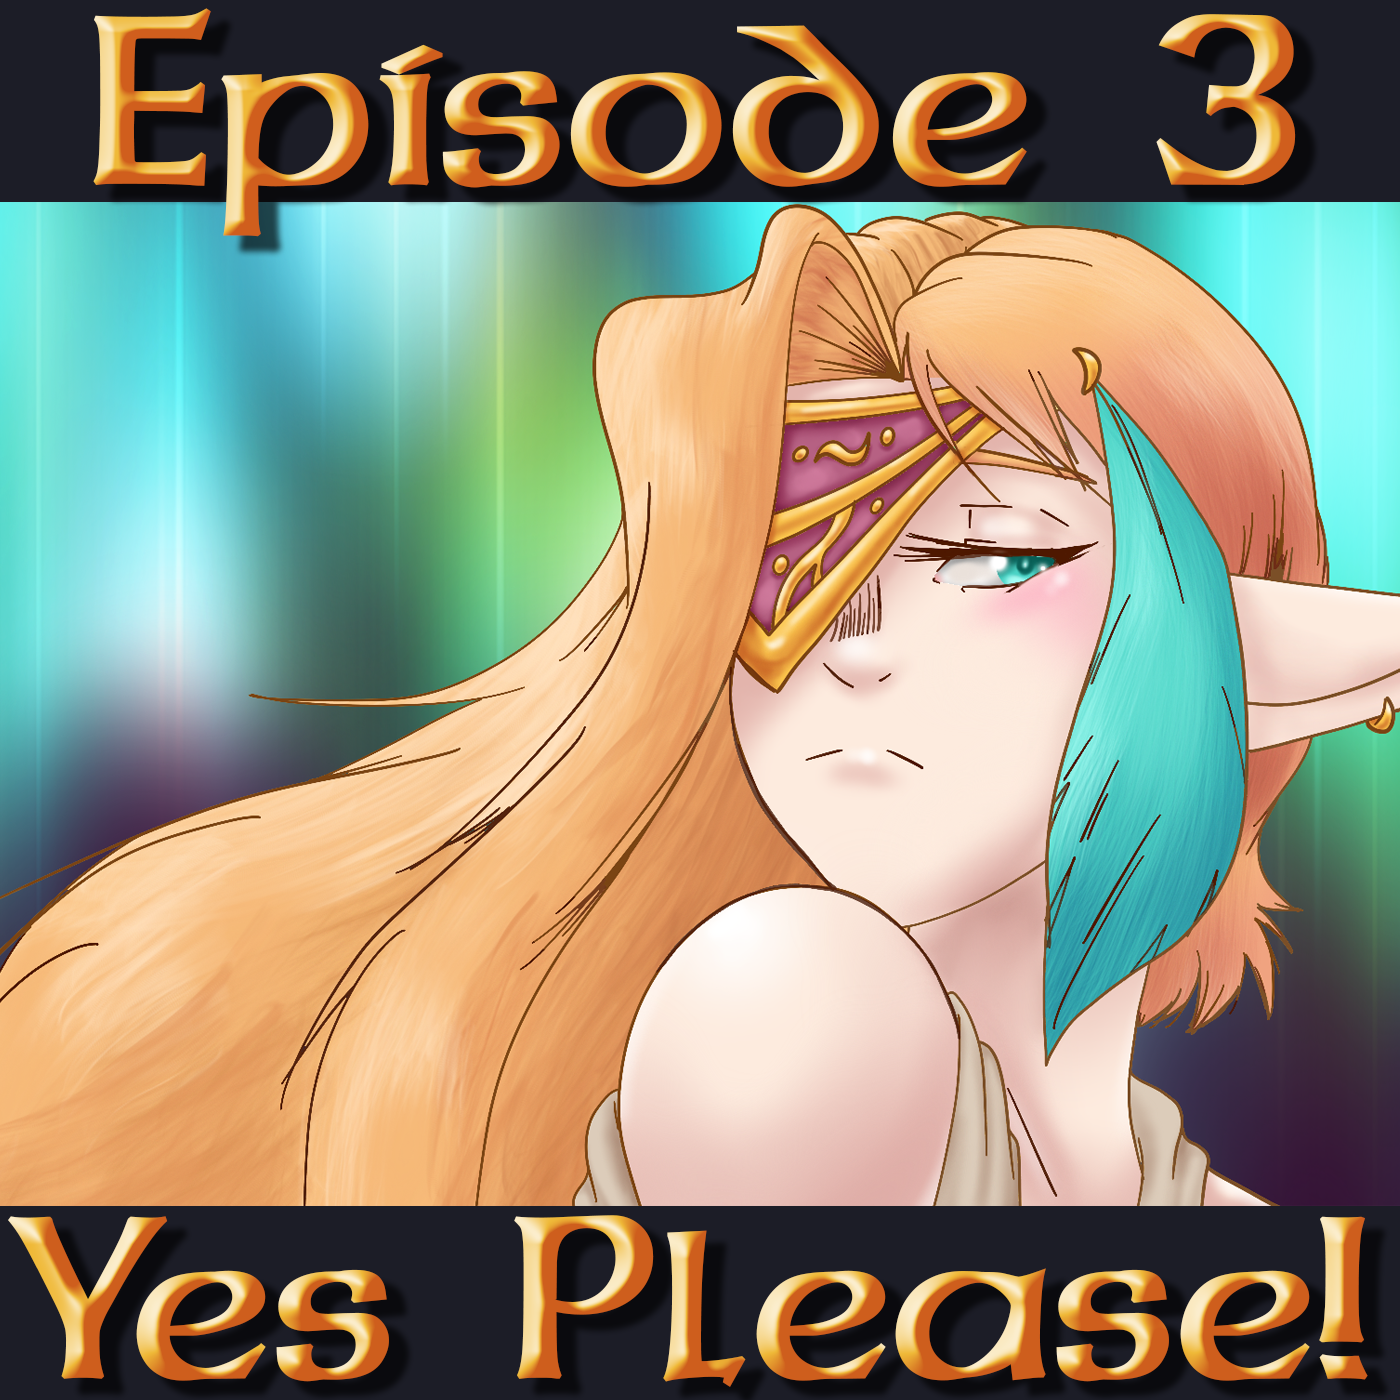 Yes Please! Episode 3: Waning of Worries (Check Please! S1 E26.5)